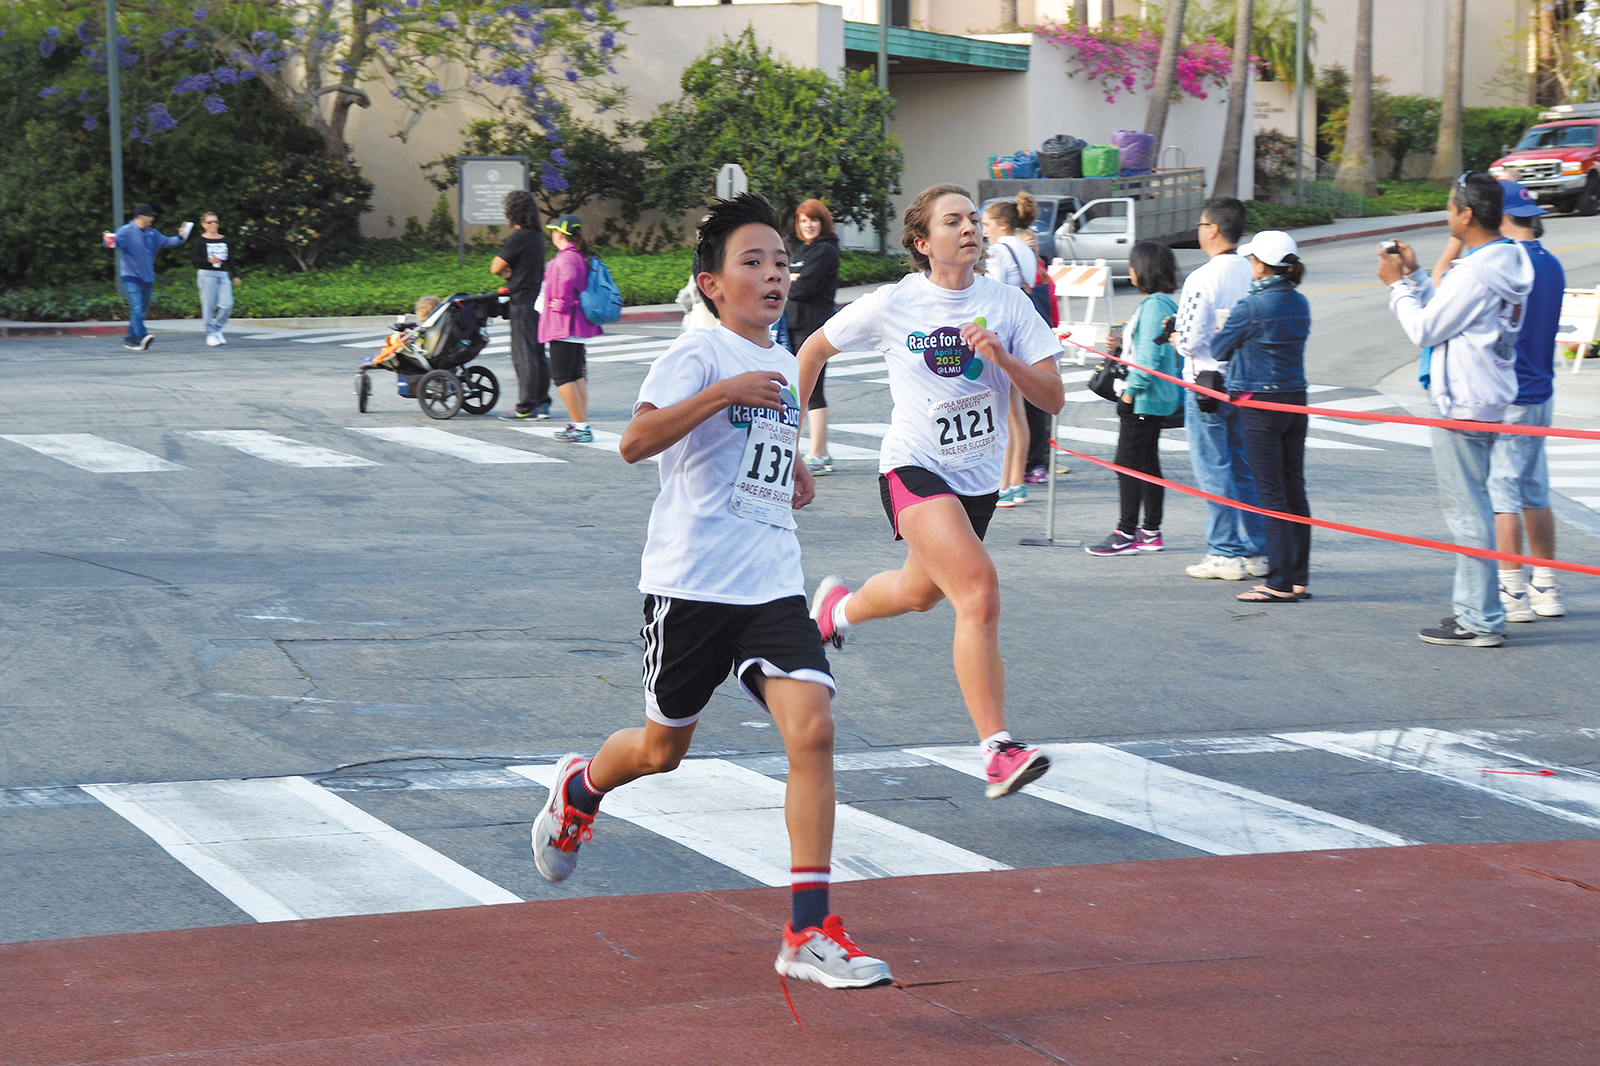 Race for Success set for Saturday, March 5 at LMU, Community Support Day at Whole Foods Playa Vista